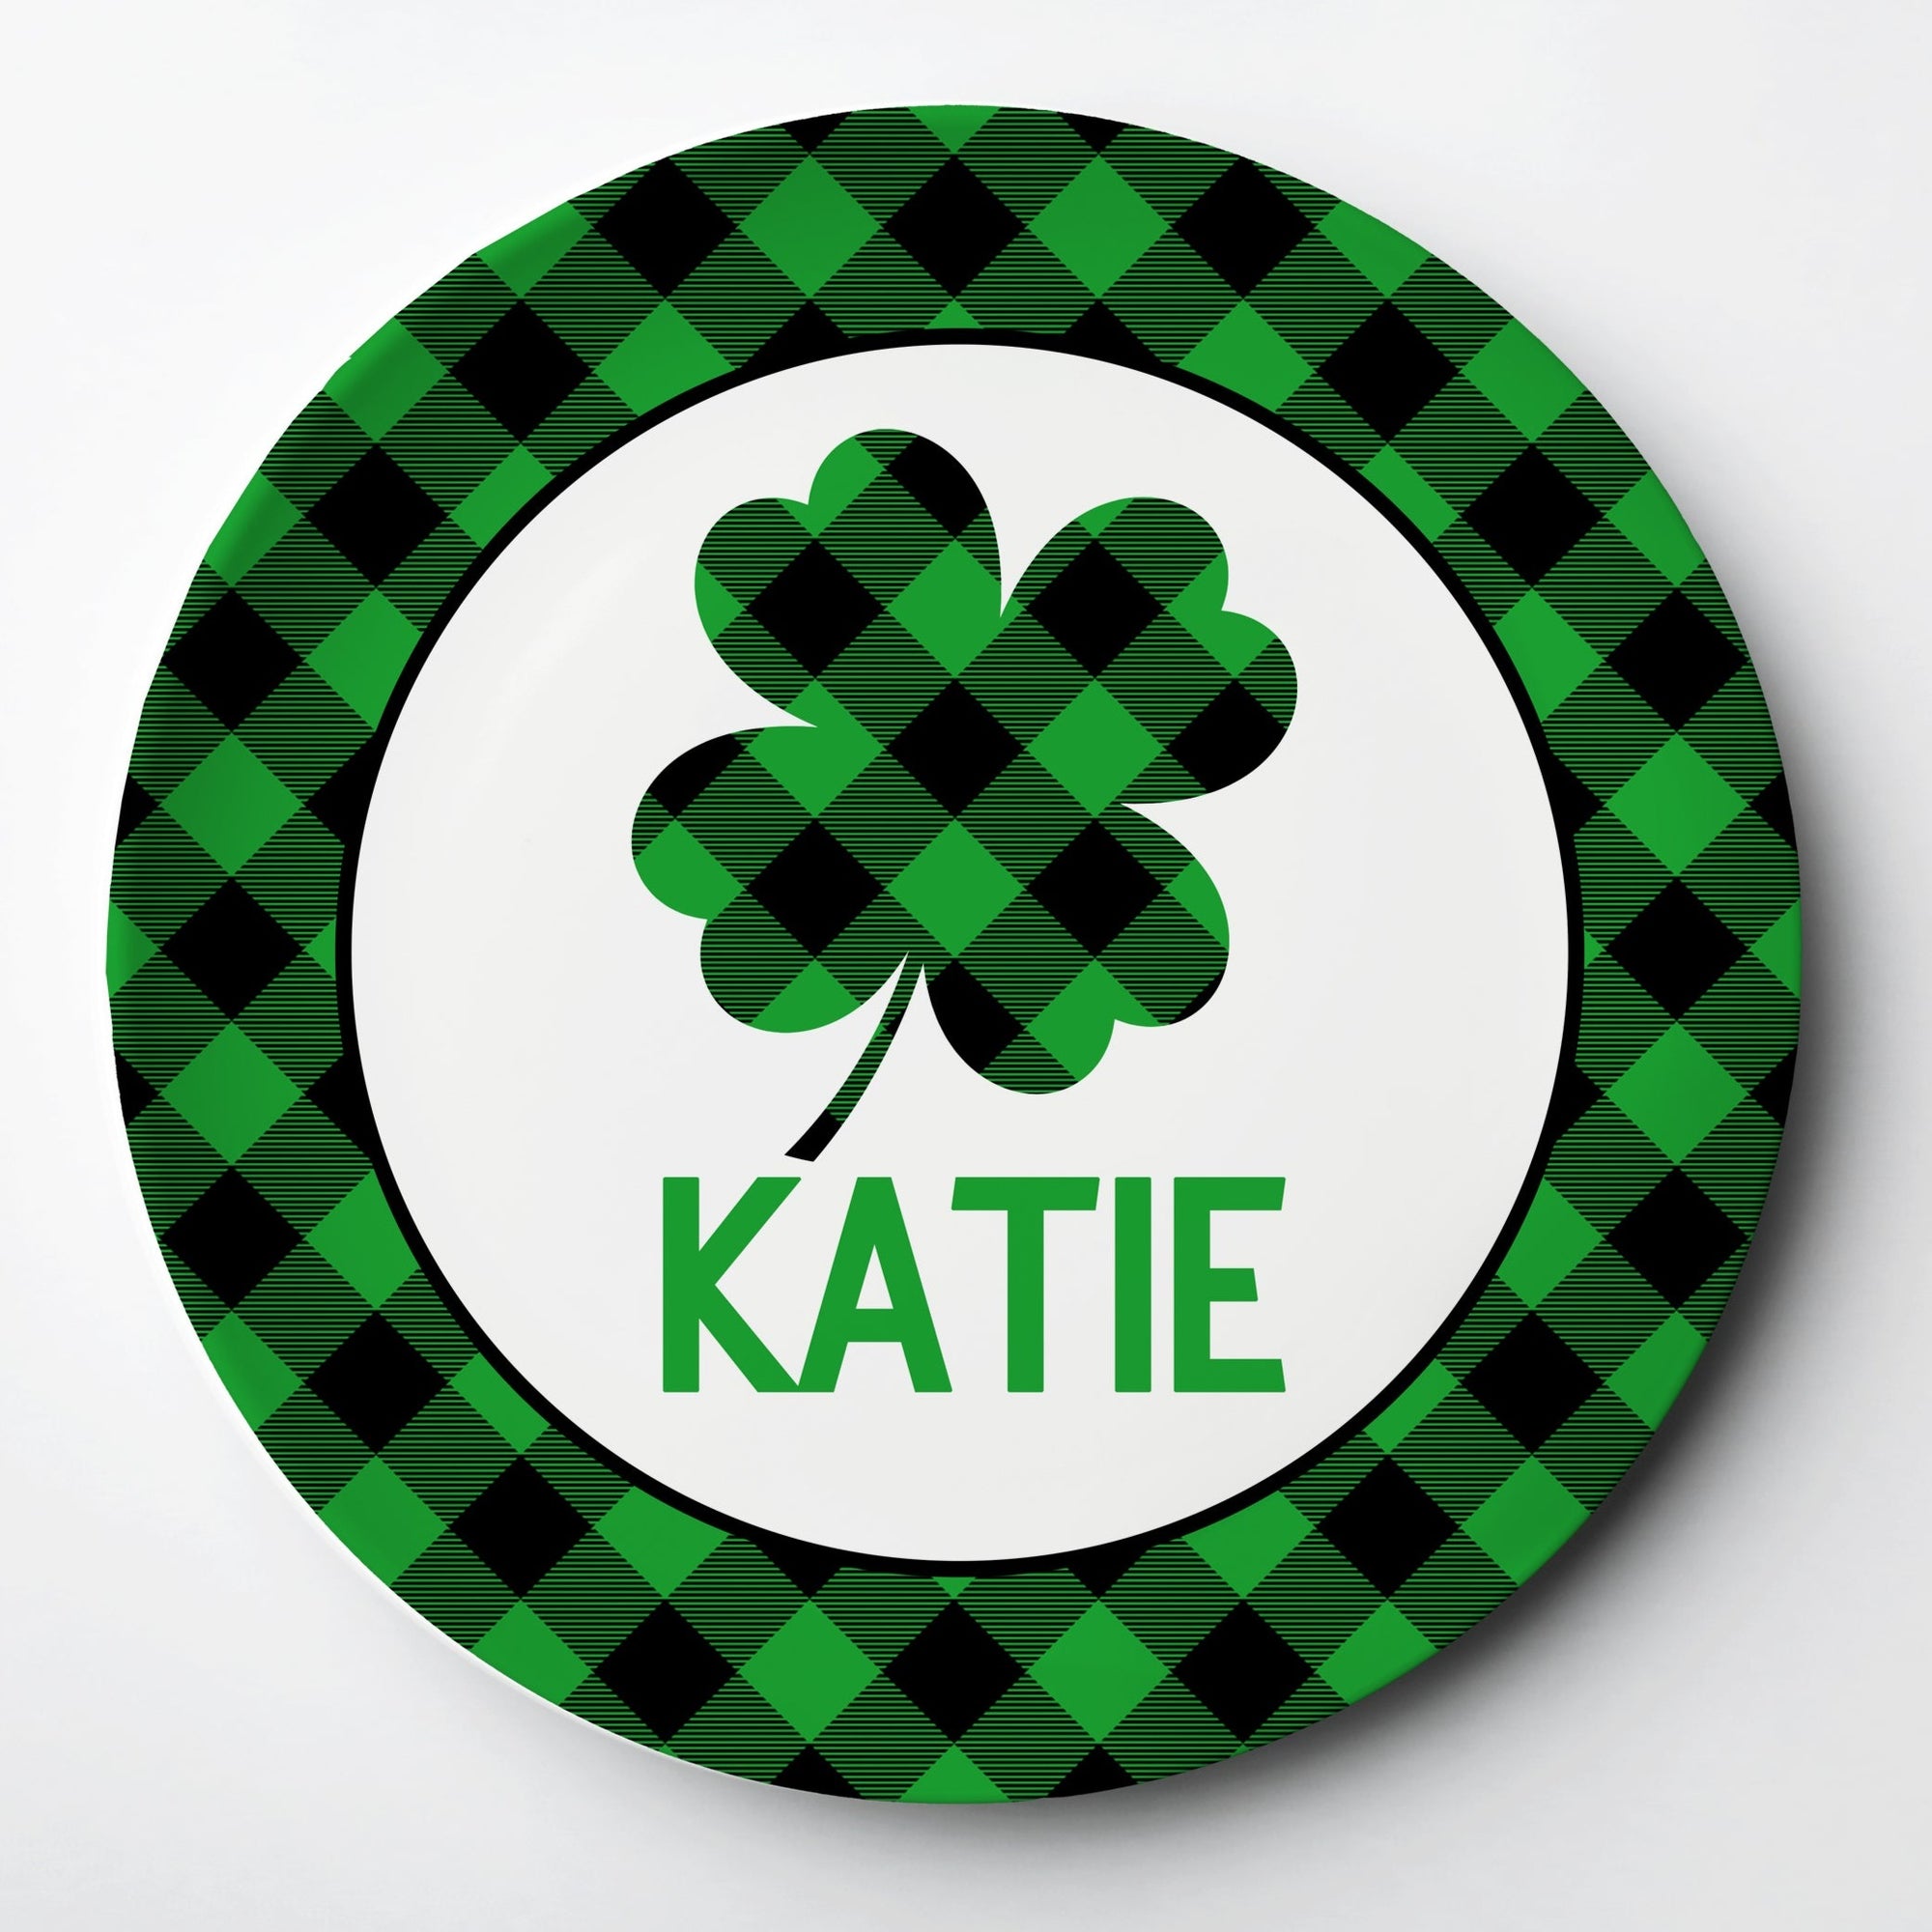 Plaid Shamrock Personalized Kid's Plate for St. Patrick's Day. Reusable, microwave, oven and dishwasher safe